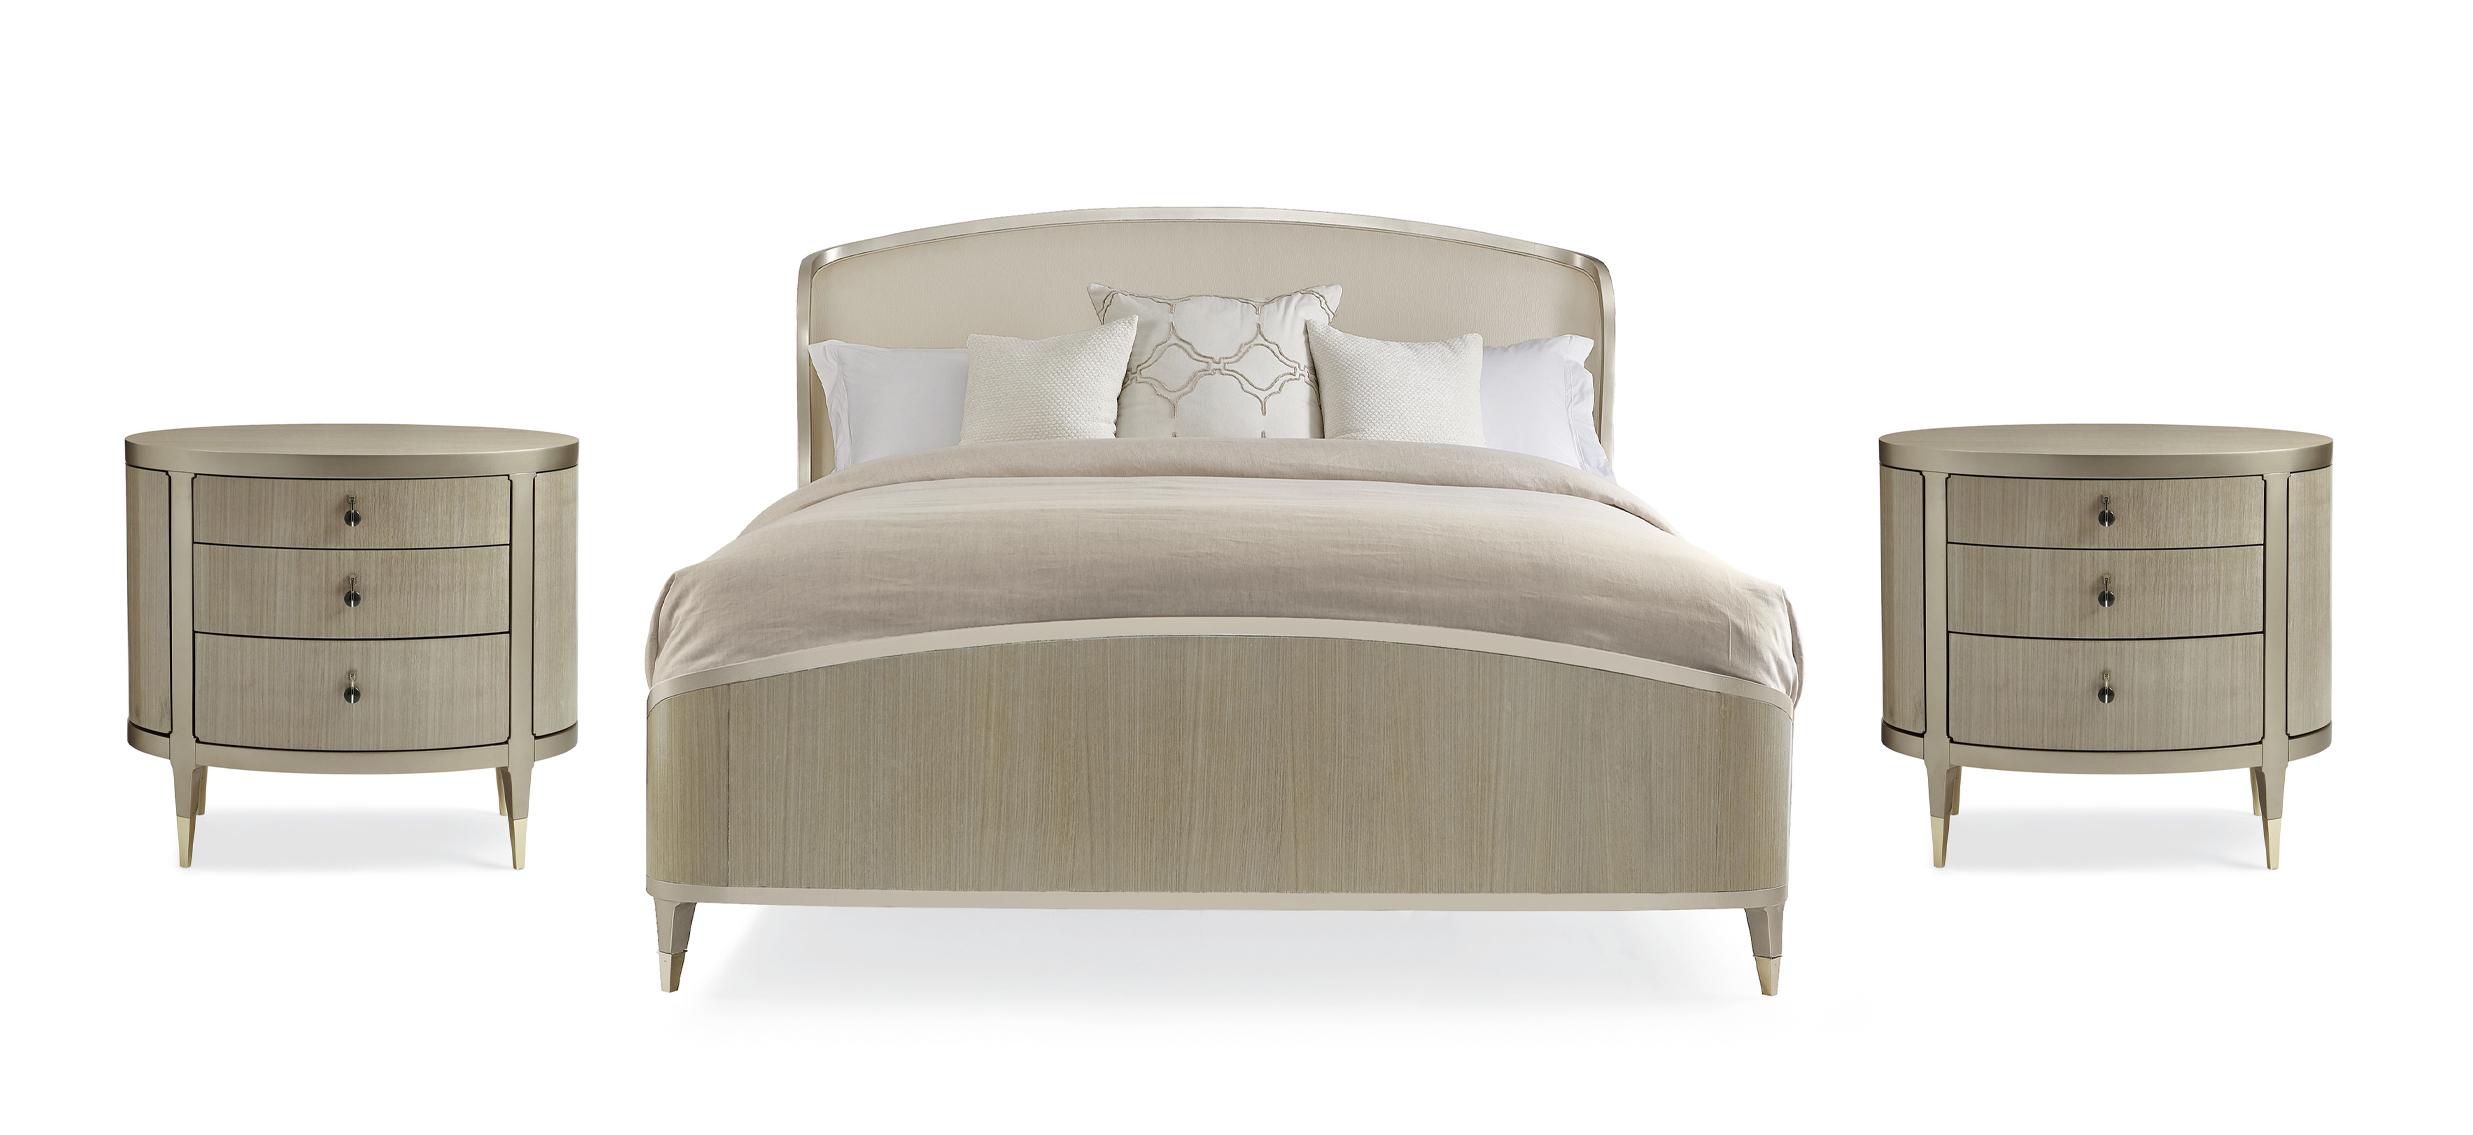 Contemporary Platform Bedroom Set GOOD NIGHTS SLEEP / A DREAM COME TRUE CLA-417-106-Q-Set-3 in Champagne Fabric